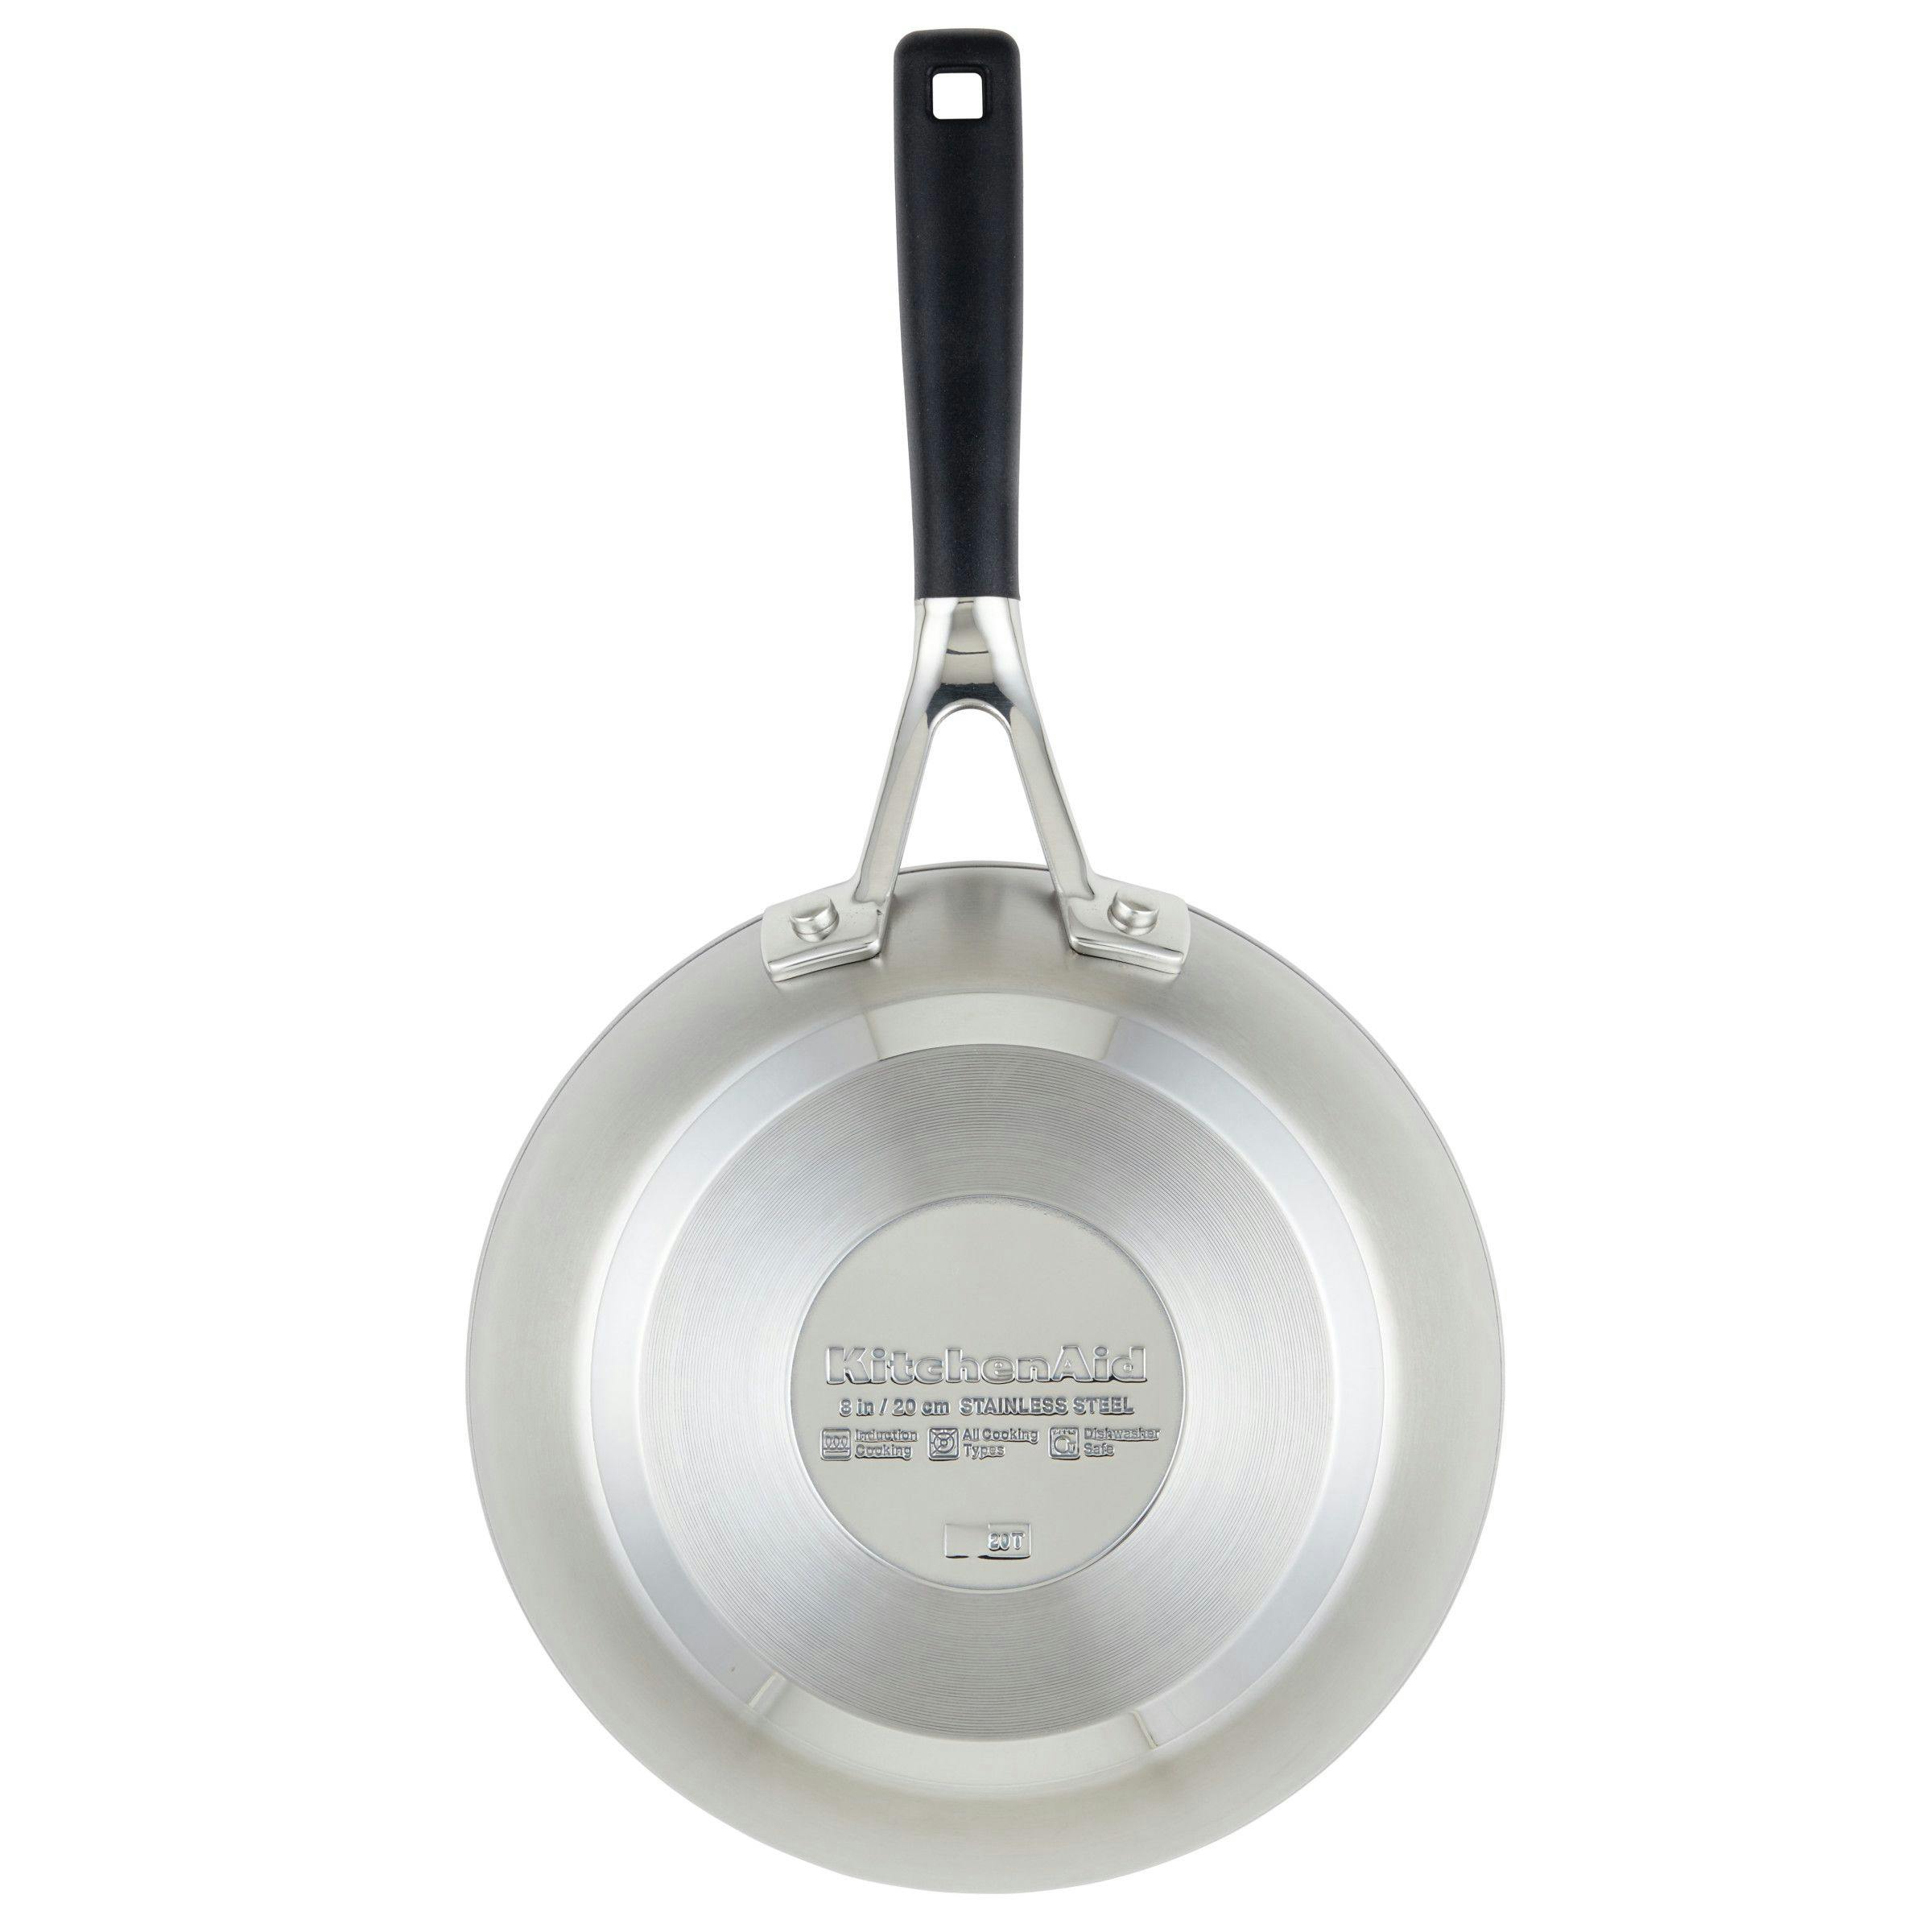 KitchenAid Stainless Steel Nonstick Induction Frying Pan, 8-Inch, Brushed Stainless Steel